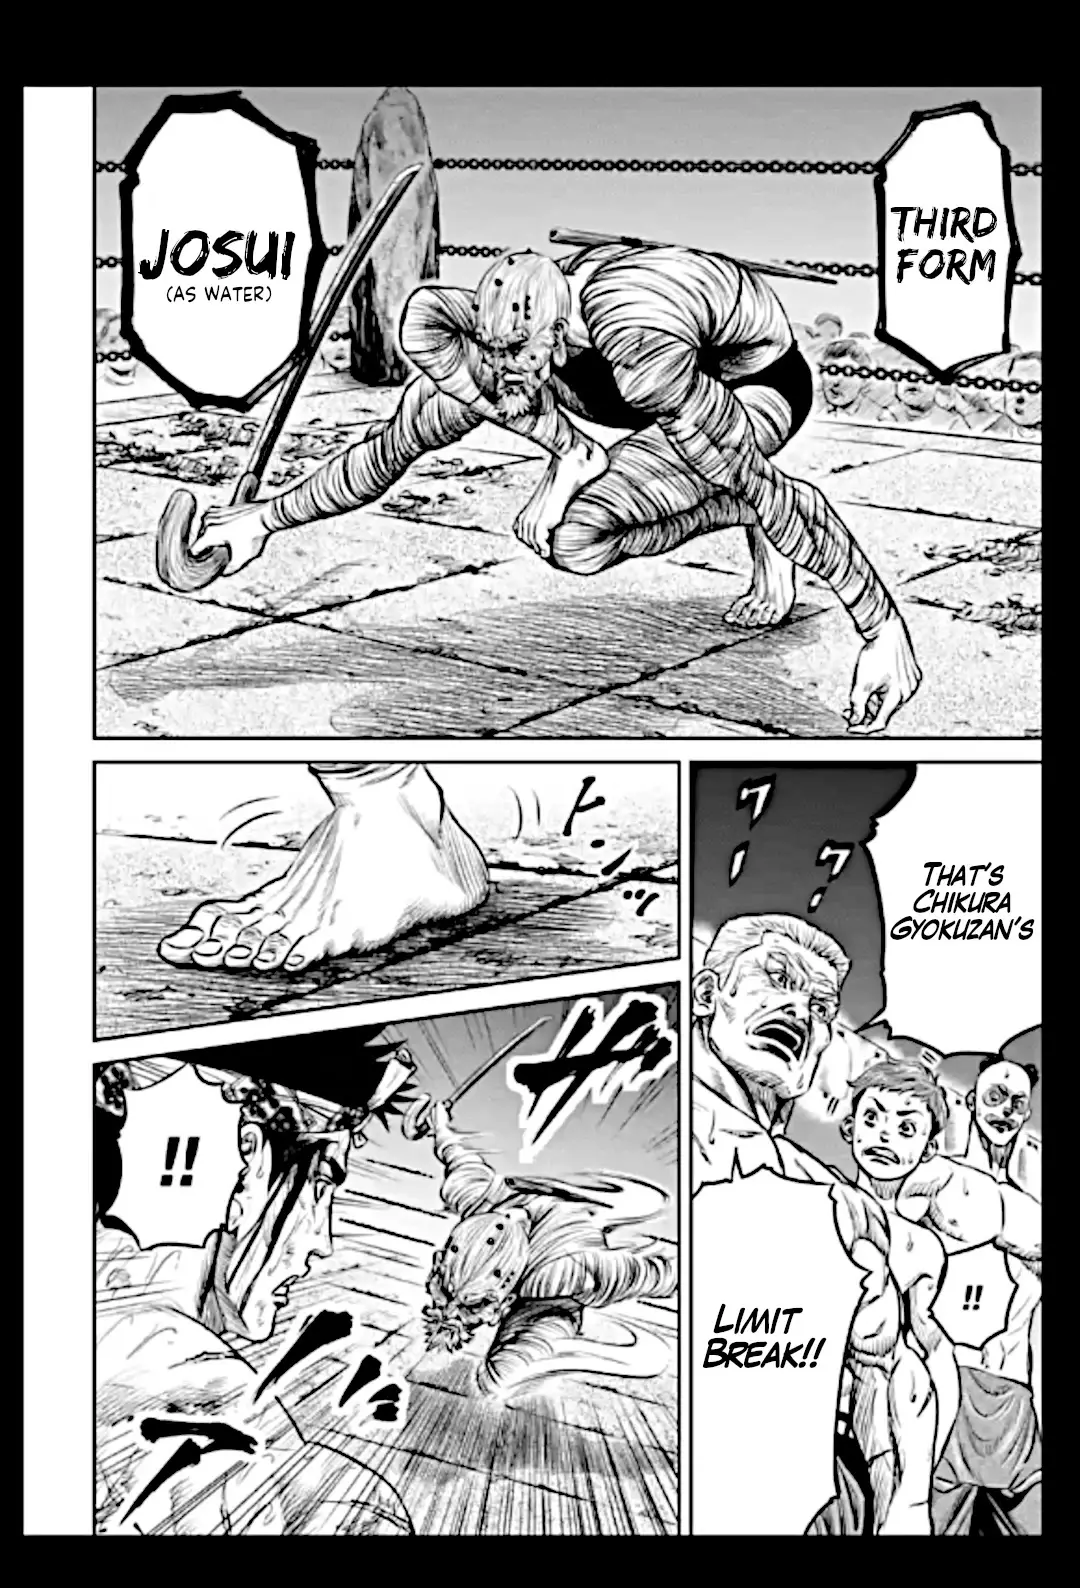 Tokyo Duel - 14 page 2-67f1236d